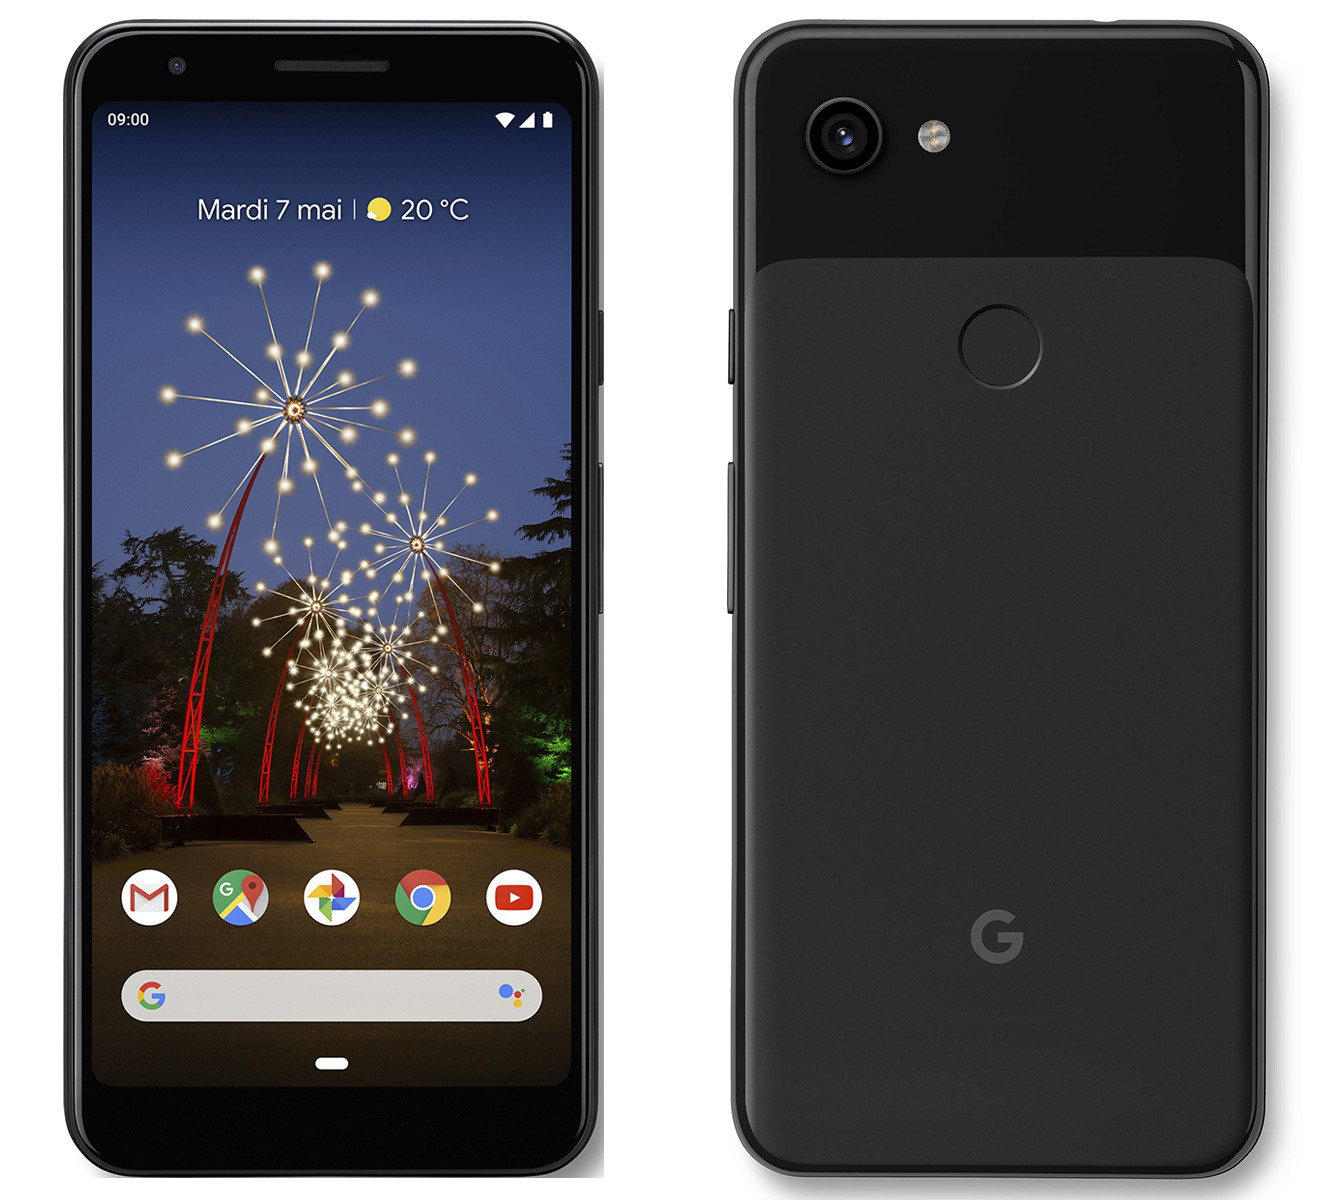 More evidence of TMobile Pixel 3a launch surfaces along with render